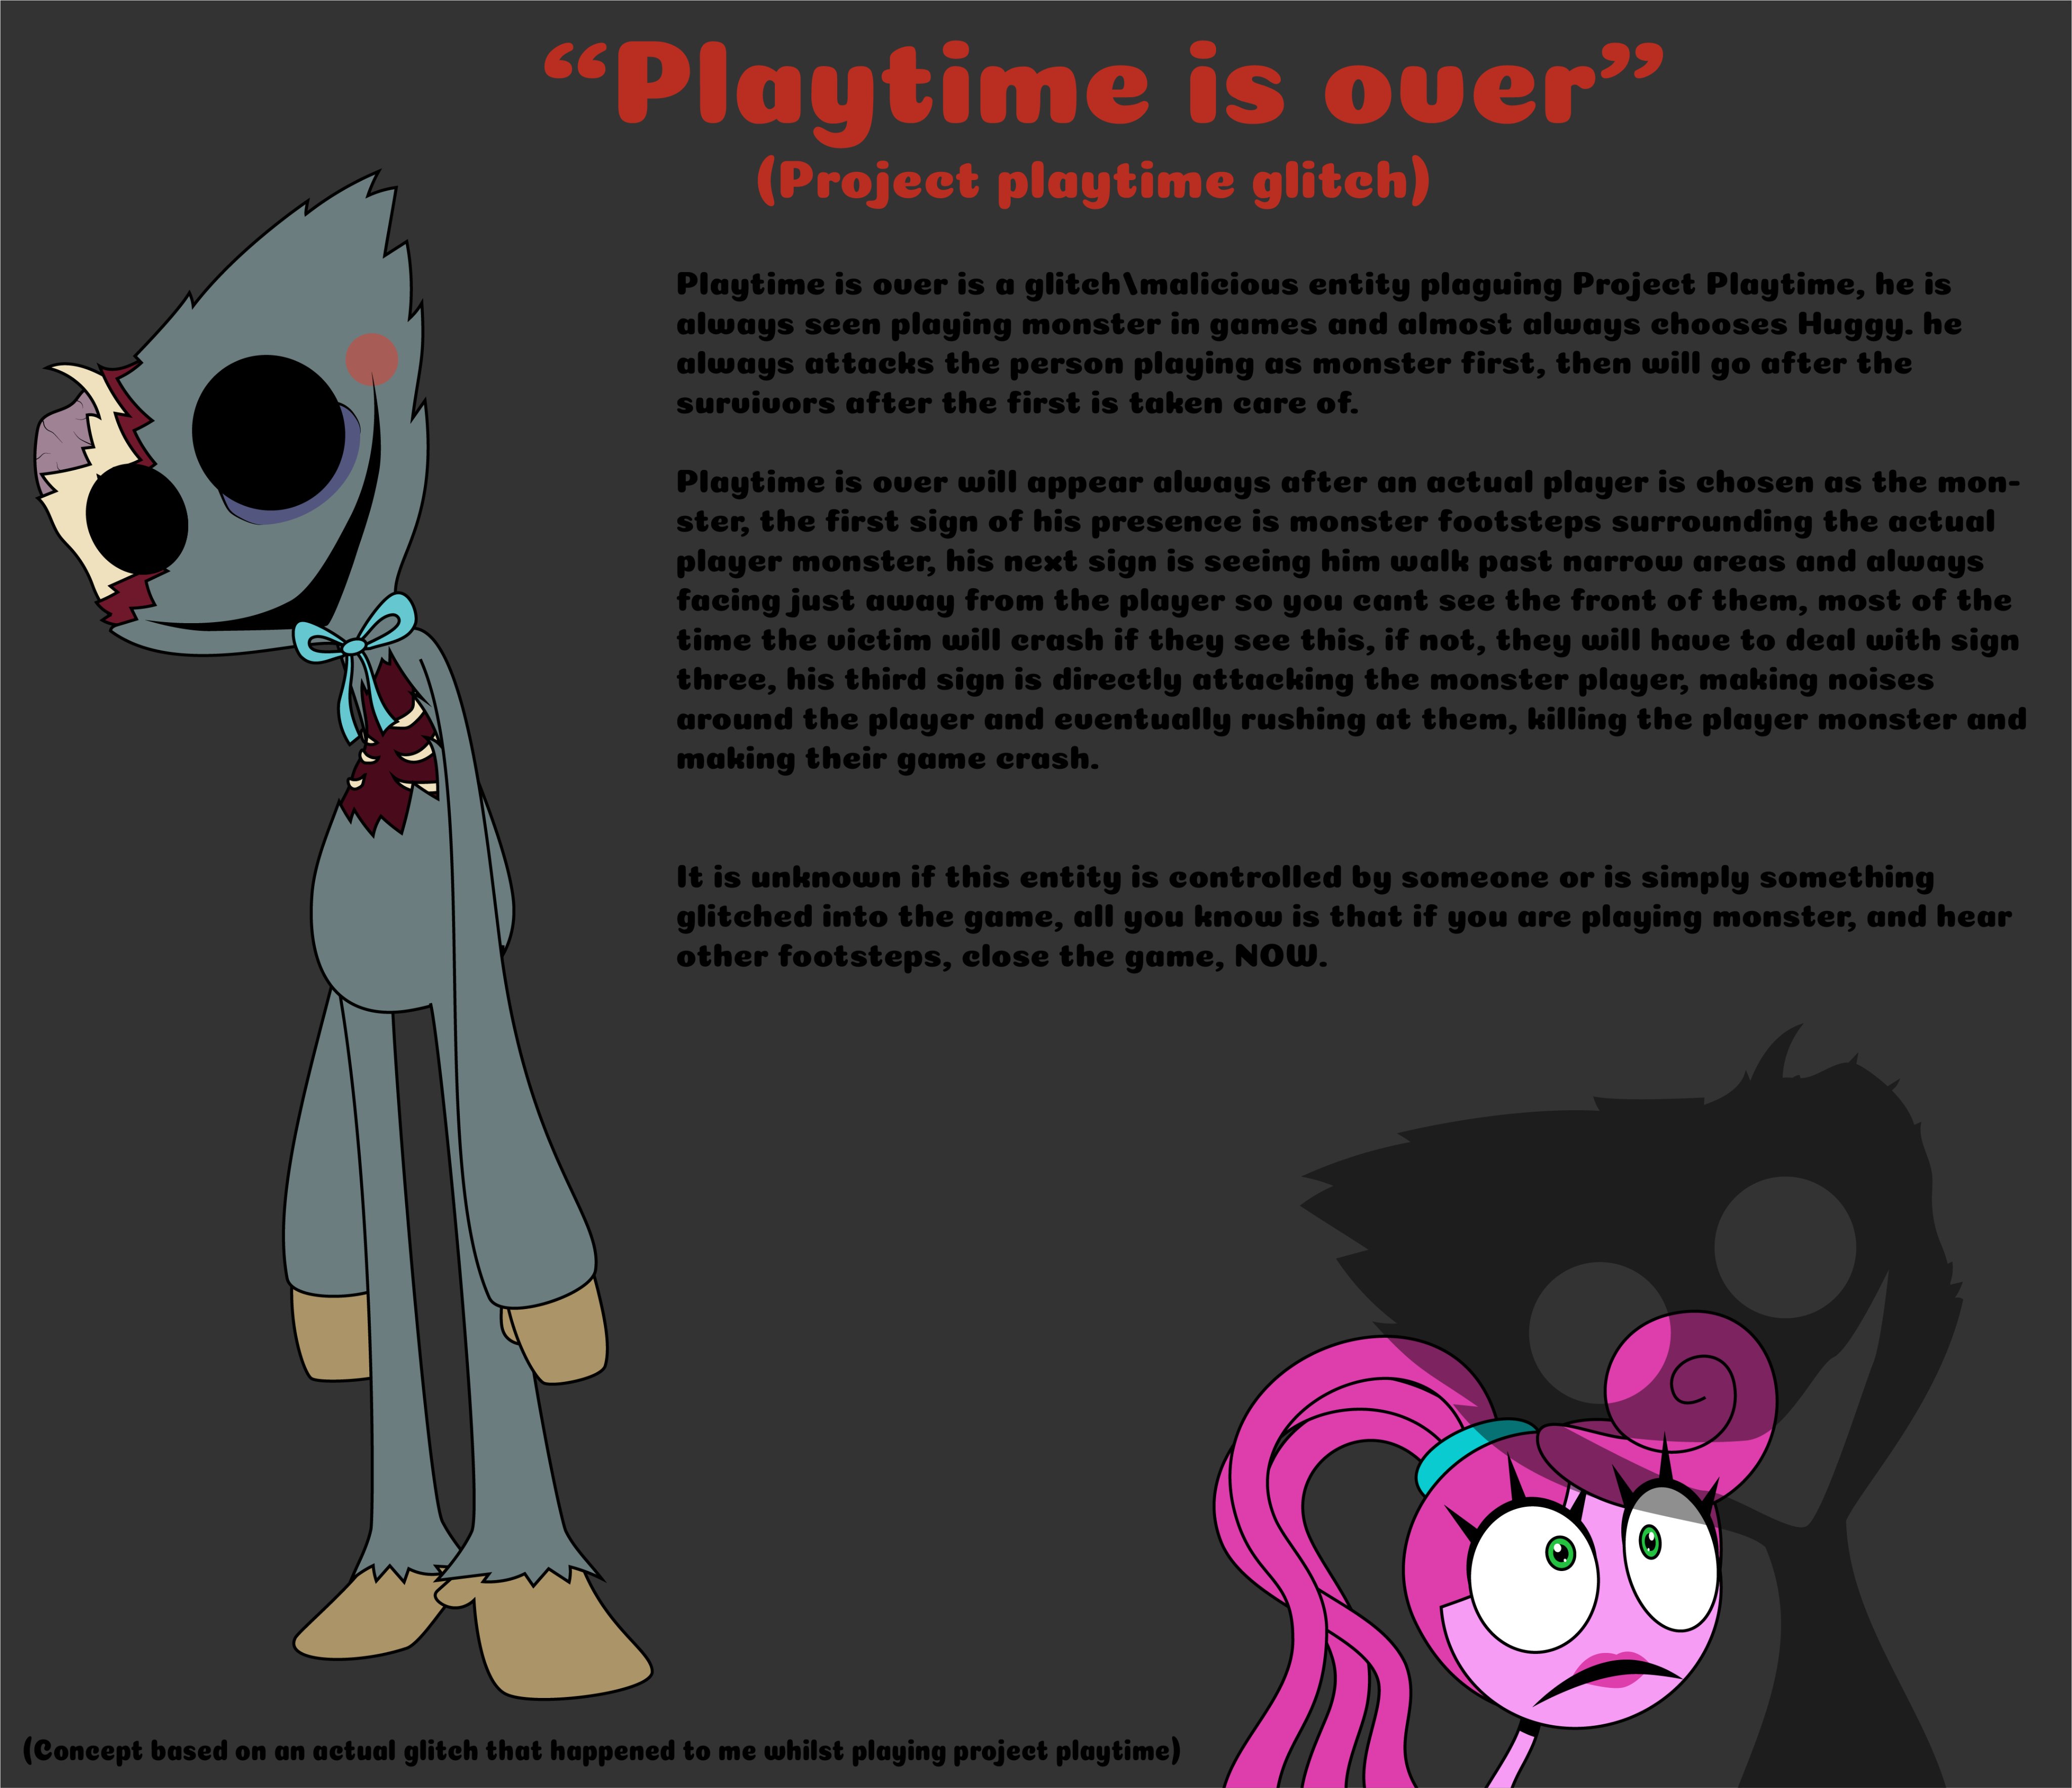 We Found The Real Playtime CO. - Poppy Playtime Creepypasta 